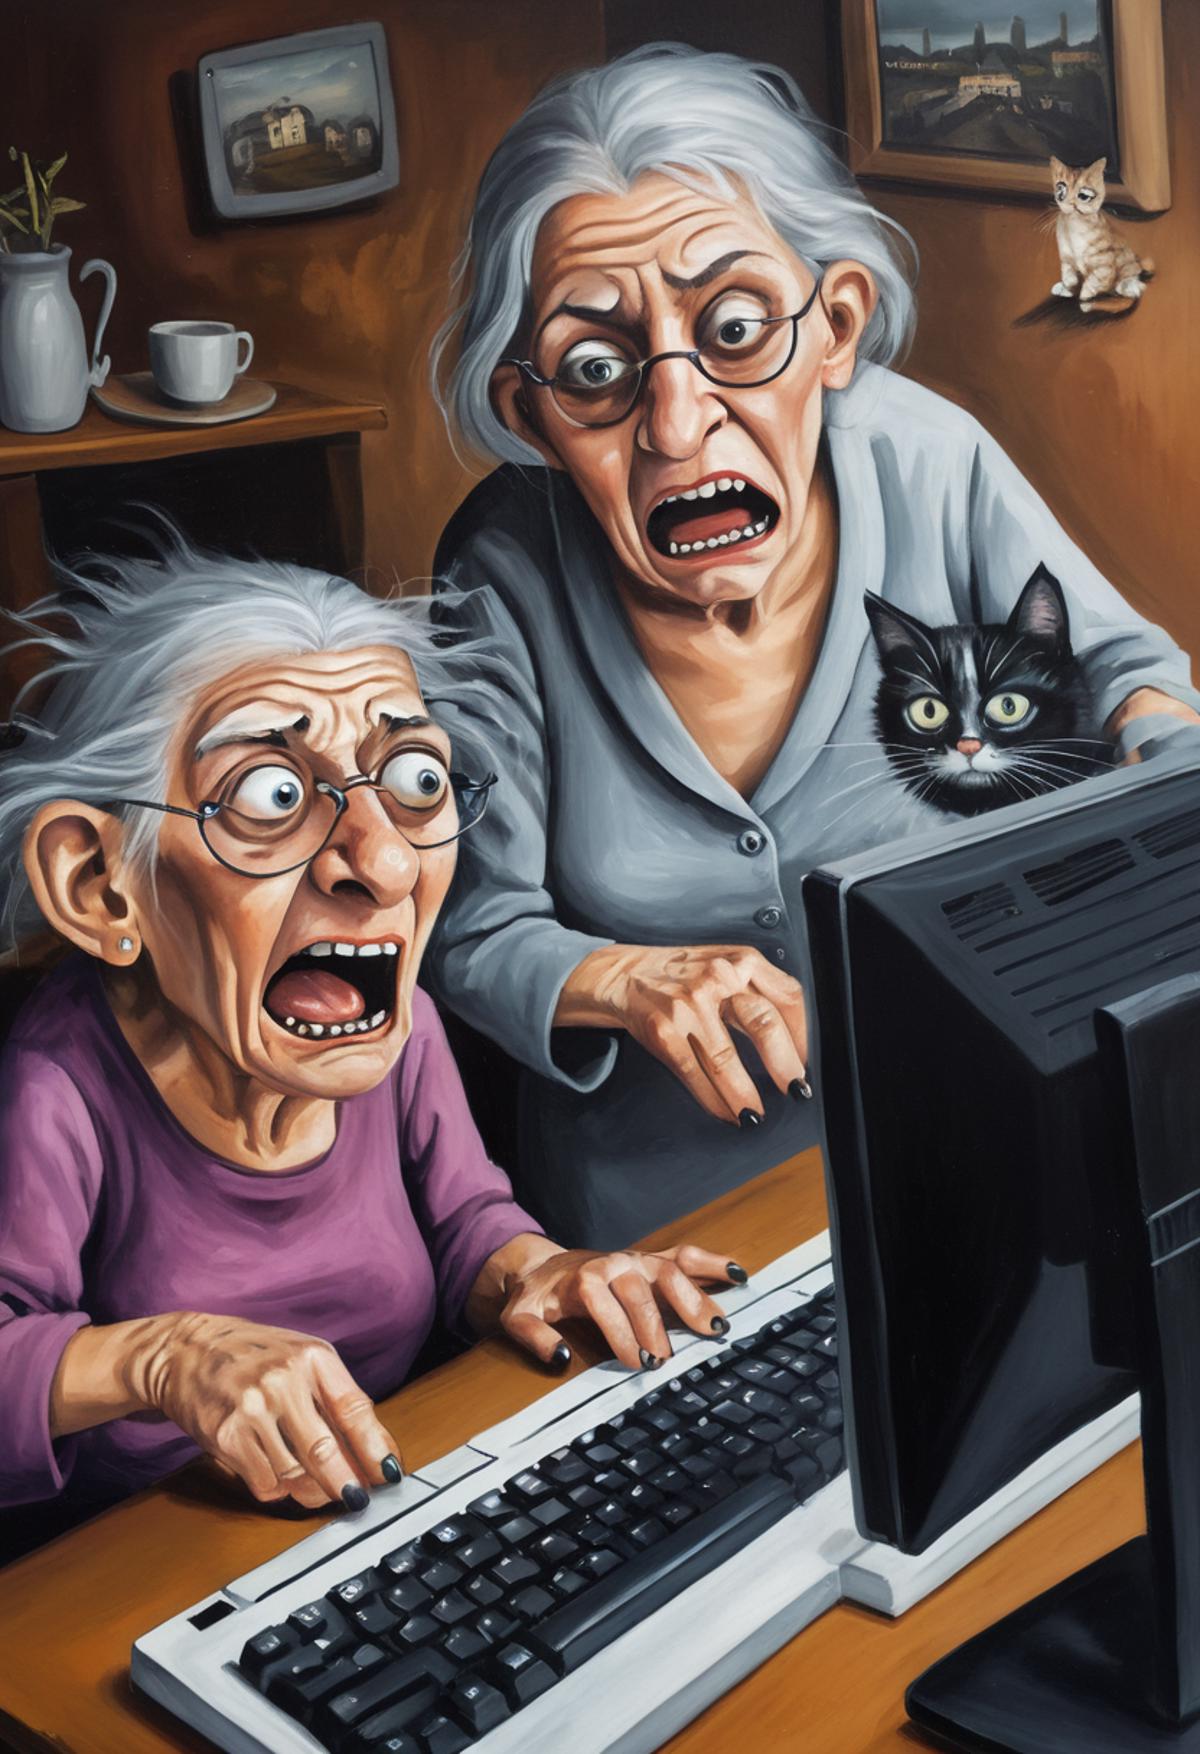 Two Older Women on Computers with a Cat in Their Lap